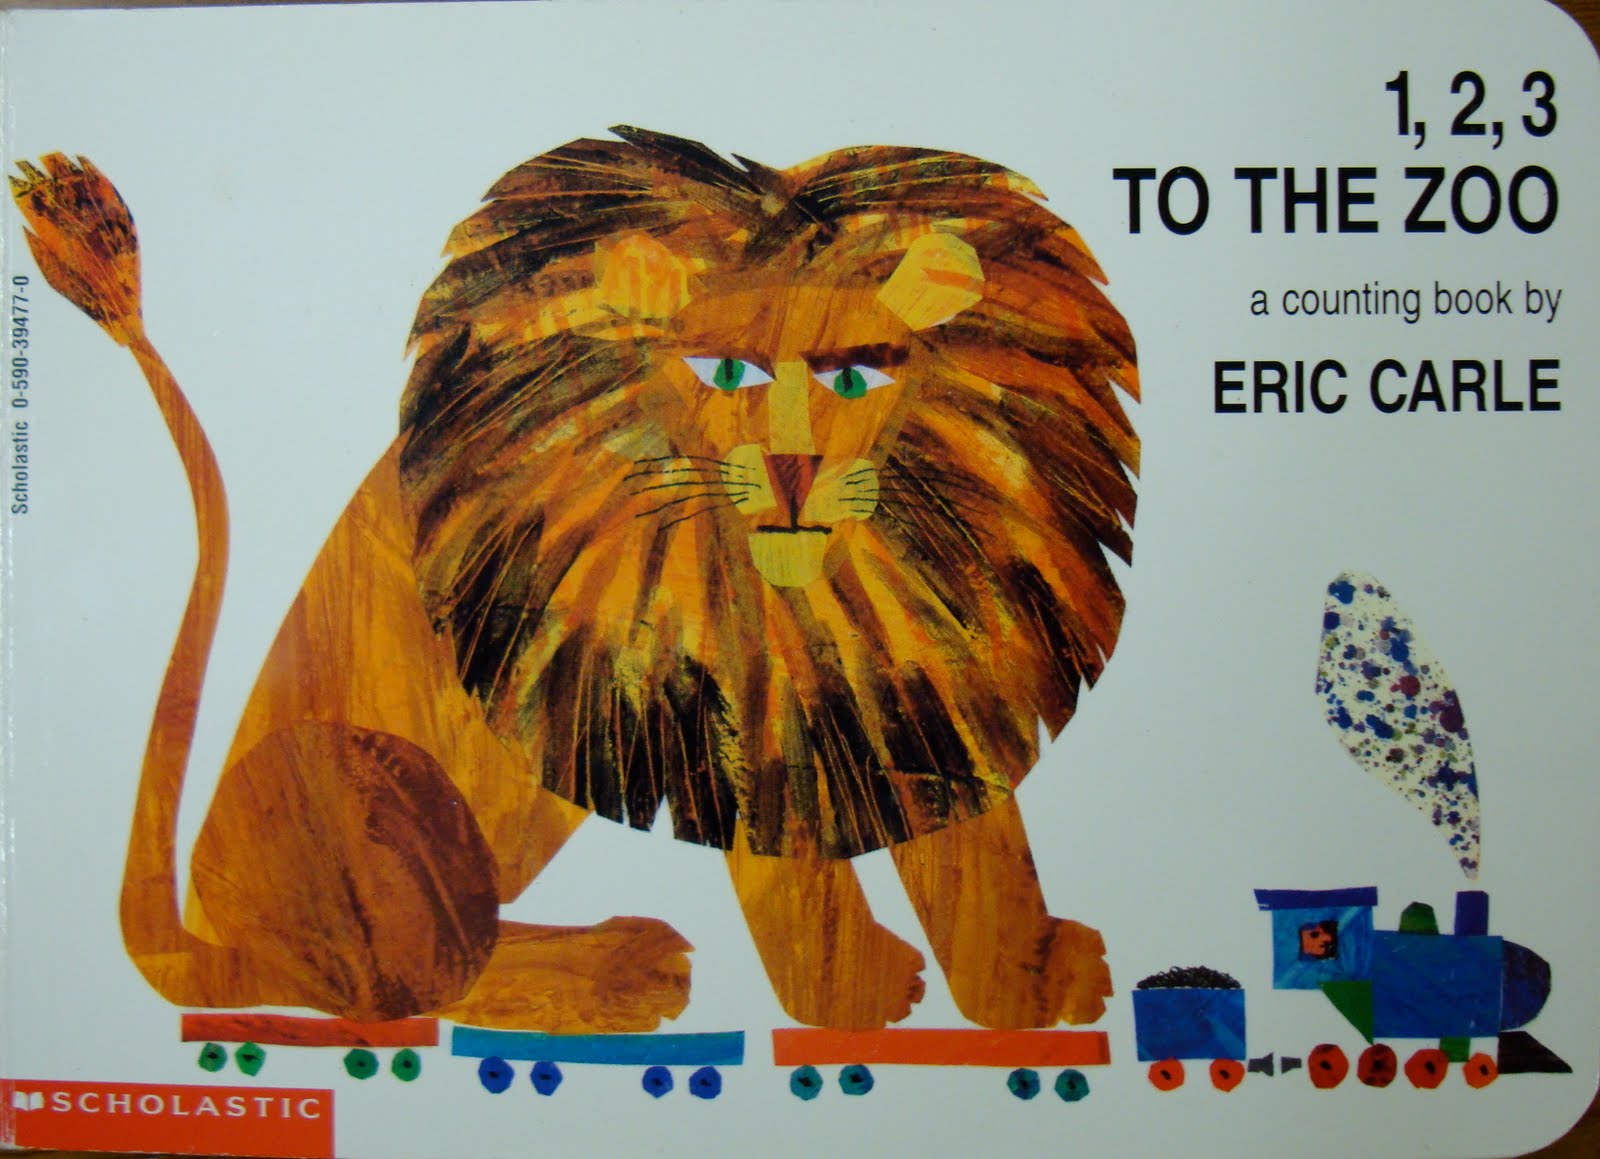 Picturebooks Everyday 1,2,3 to the Zoo, by Eric Carle